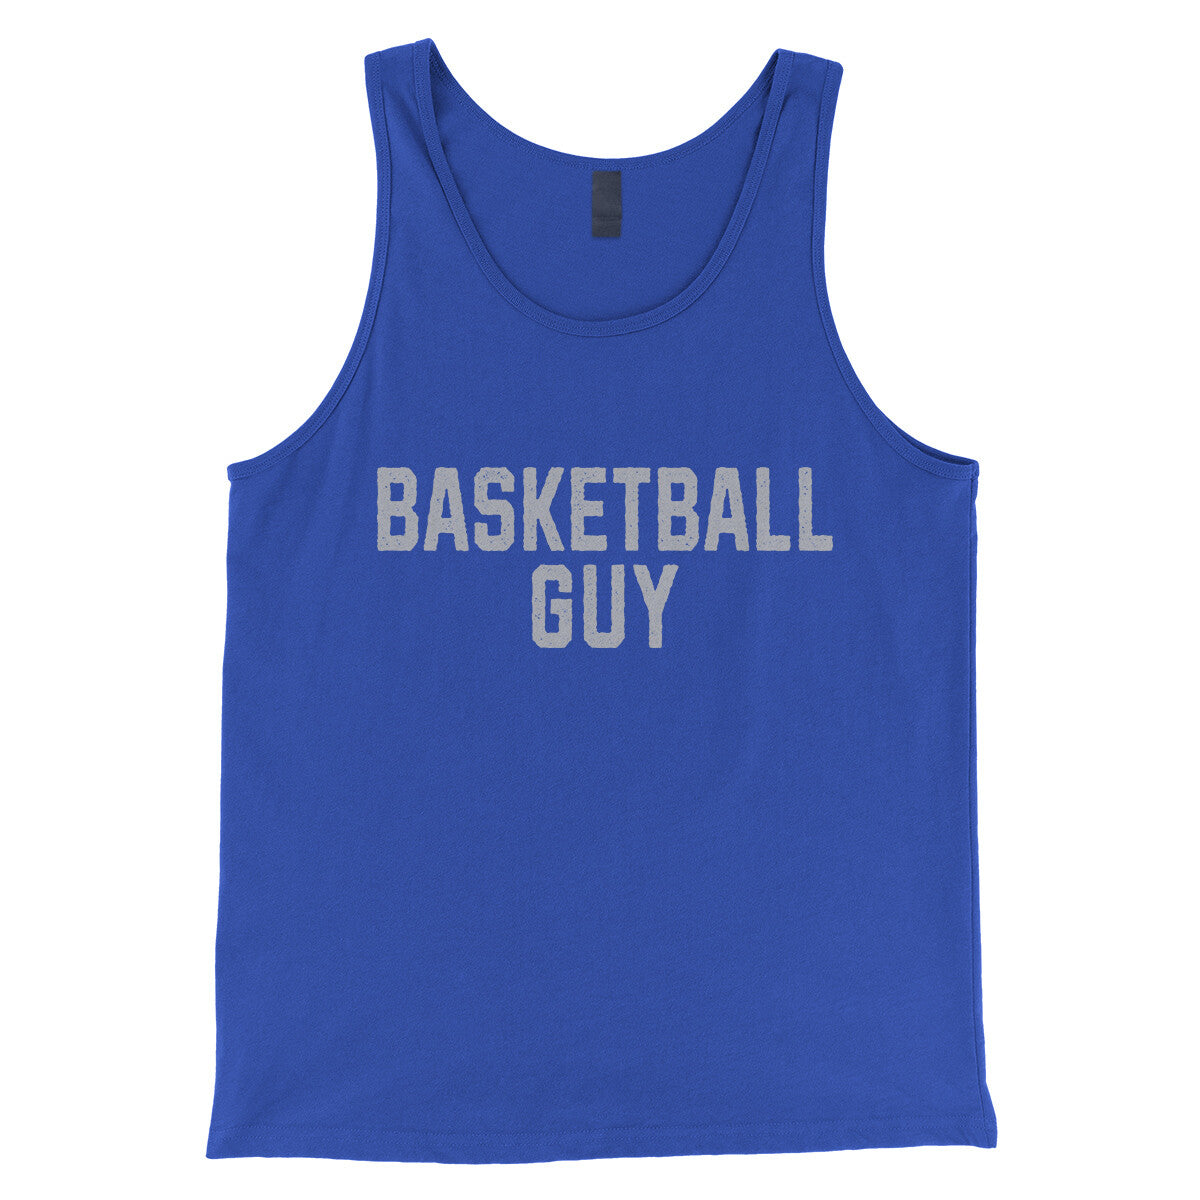 Basketball Guy in True Royal Color